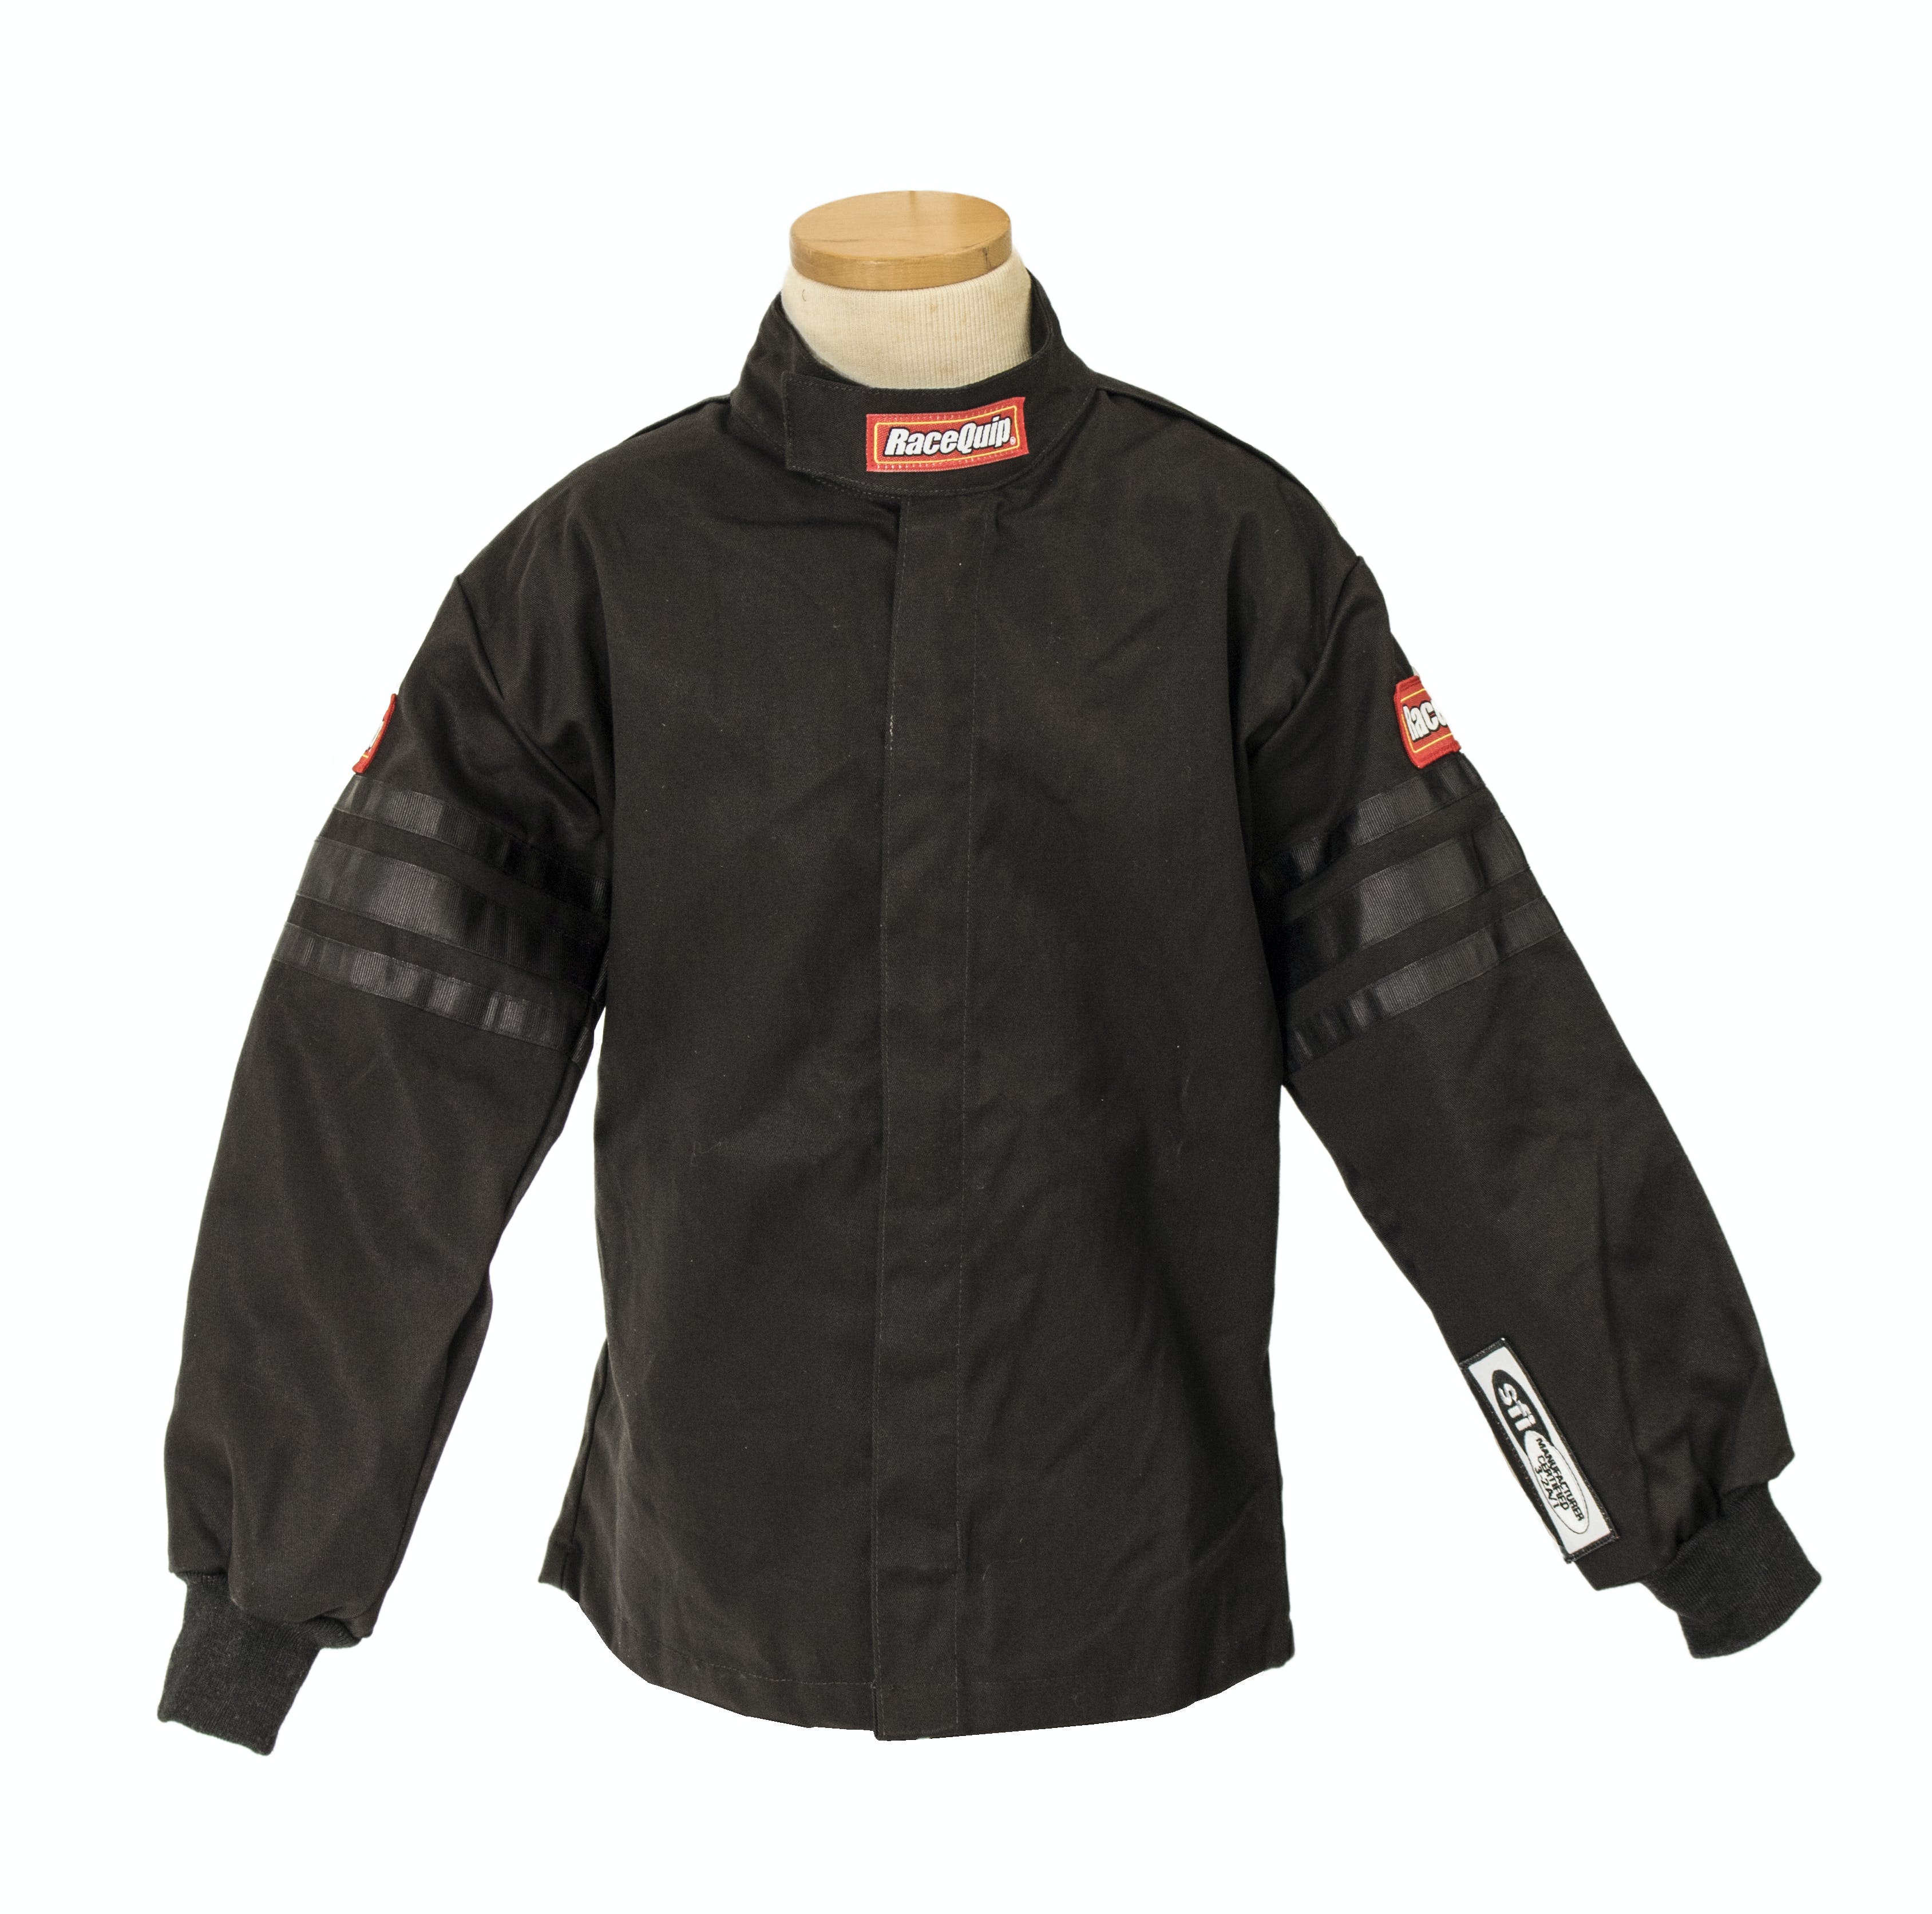 RaceQuip 1969991 Single Layer Racing Driver Fire Suit Jacket SFI 3.2A/ 1; Black Trim Youth, XS